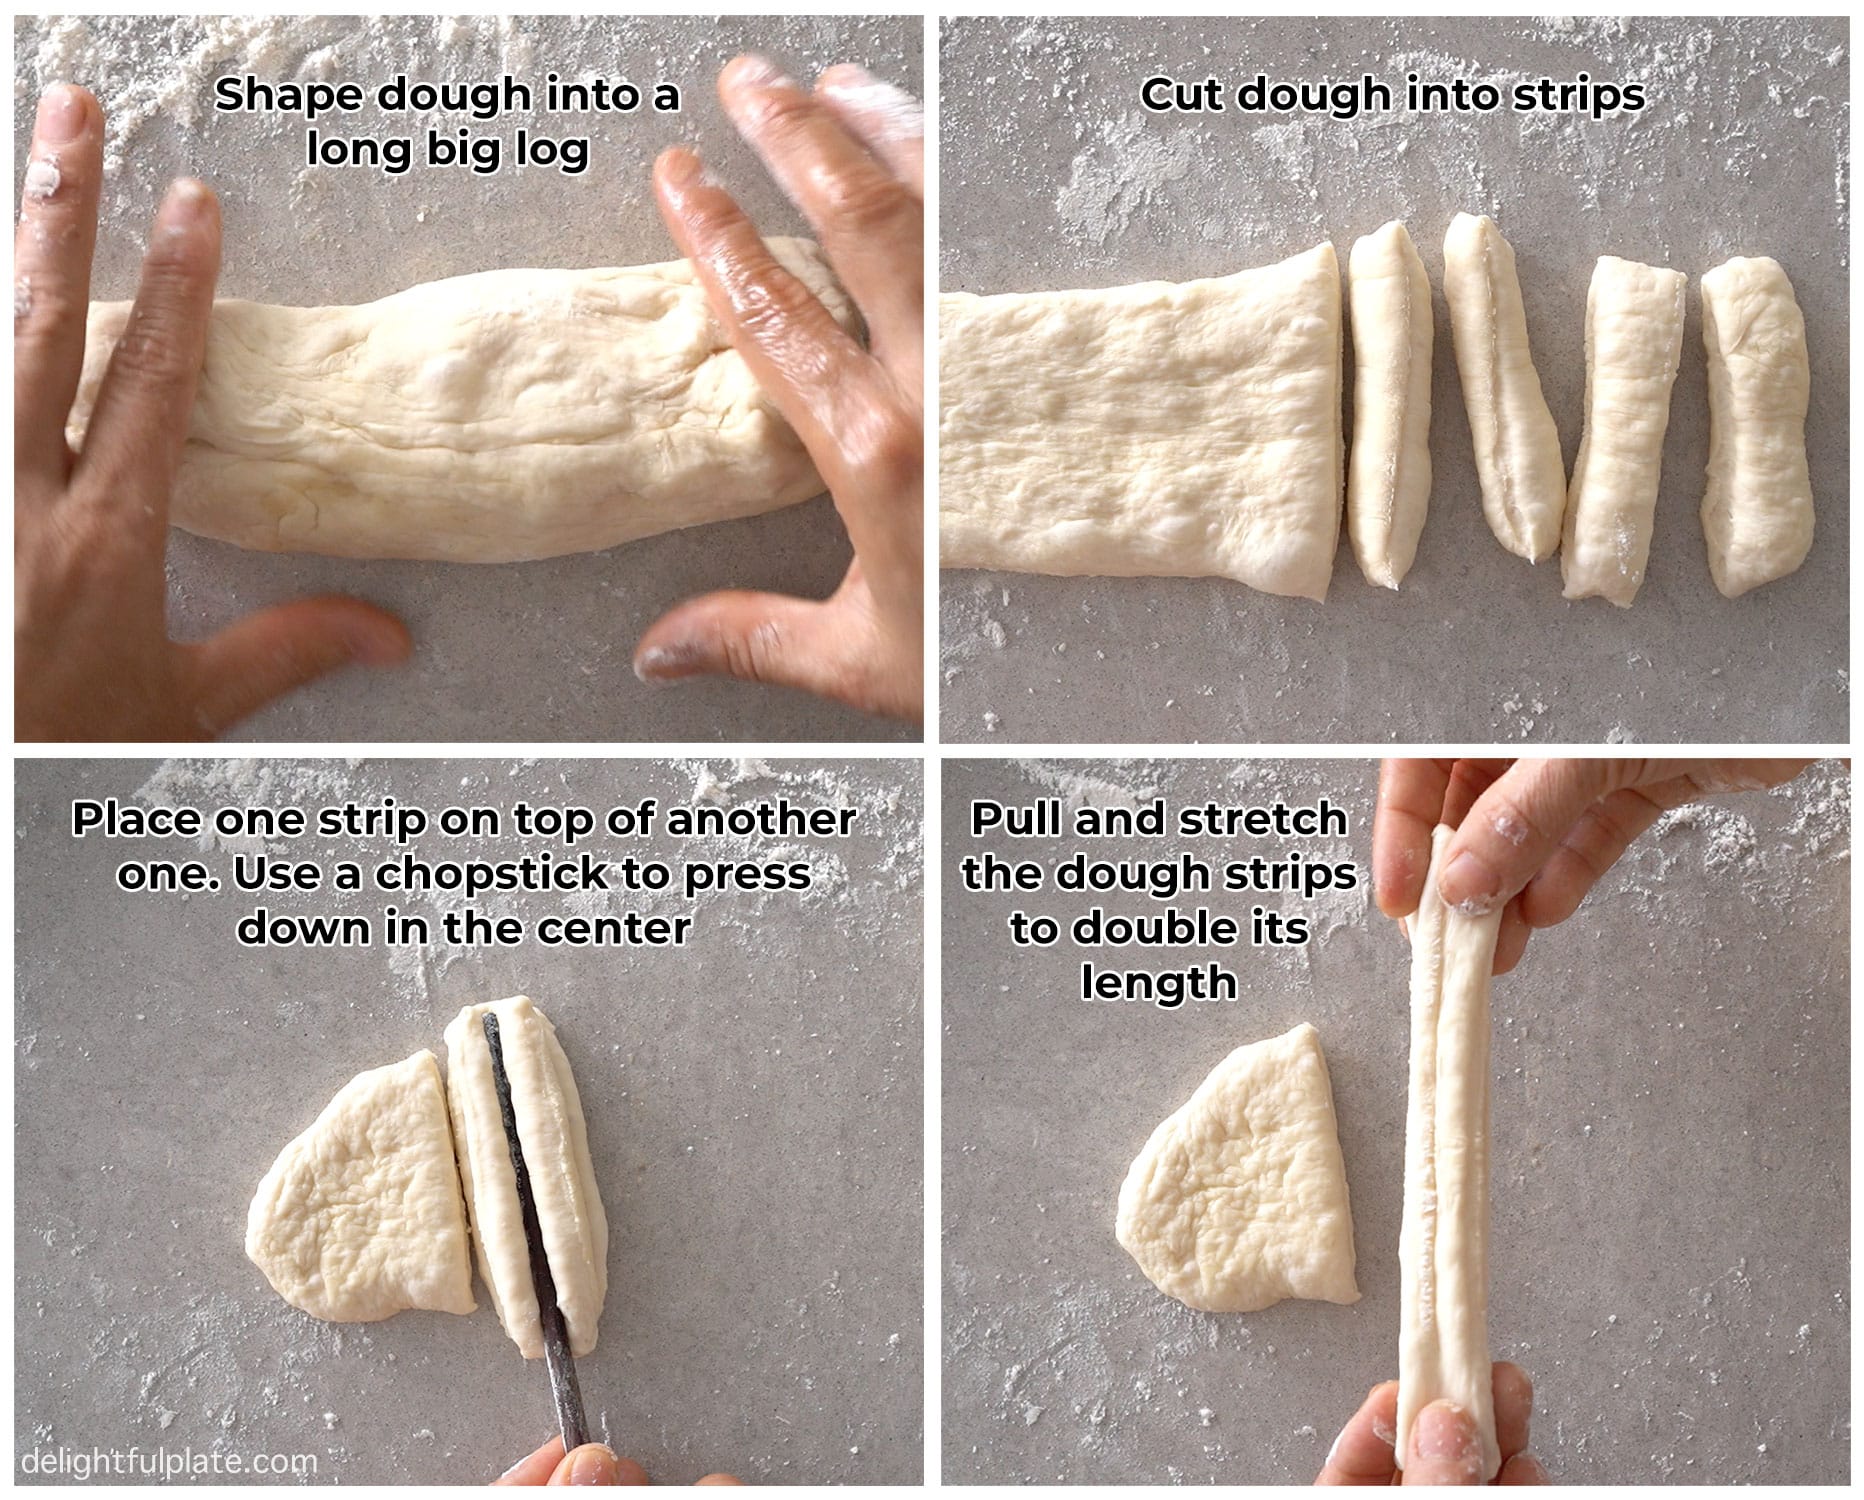 cutting and stretching dough strips